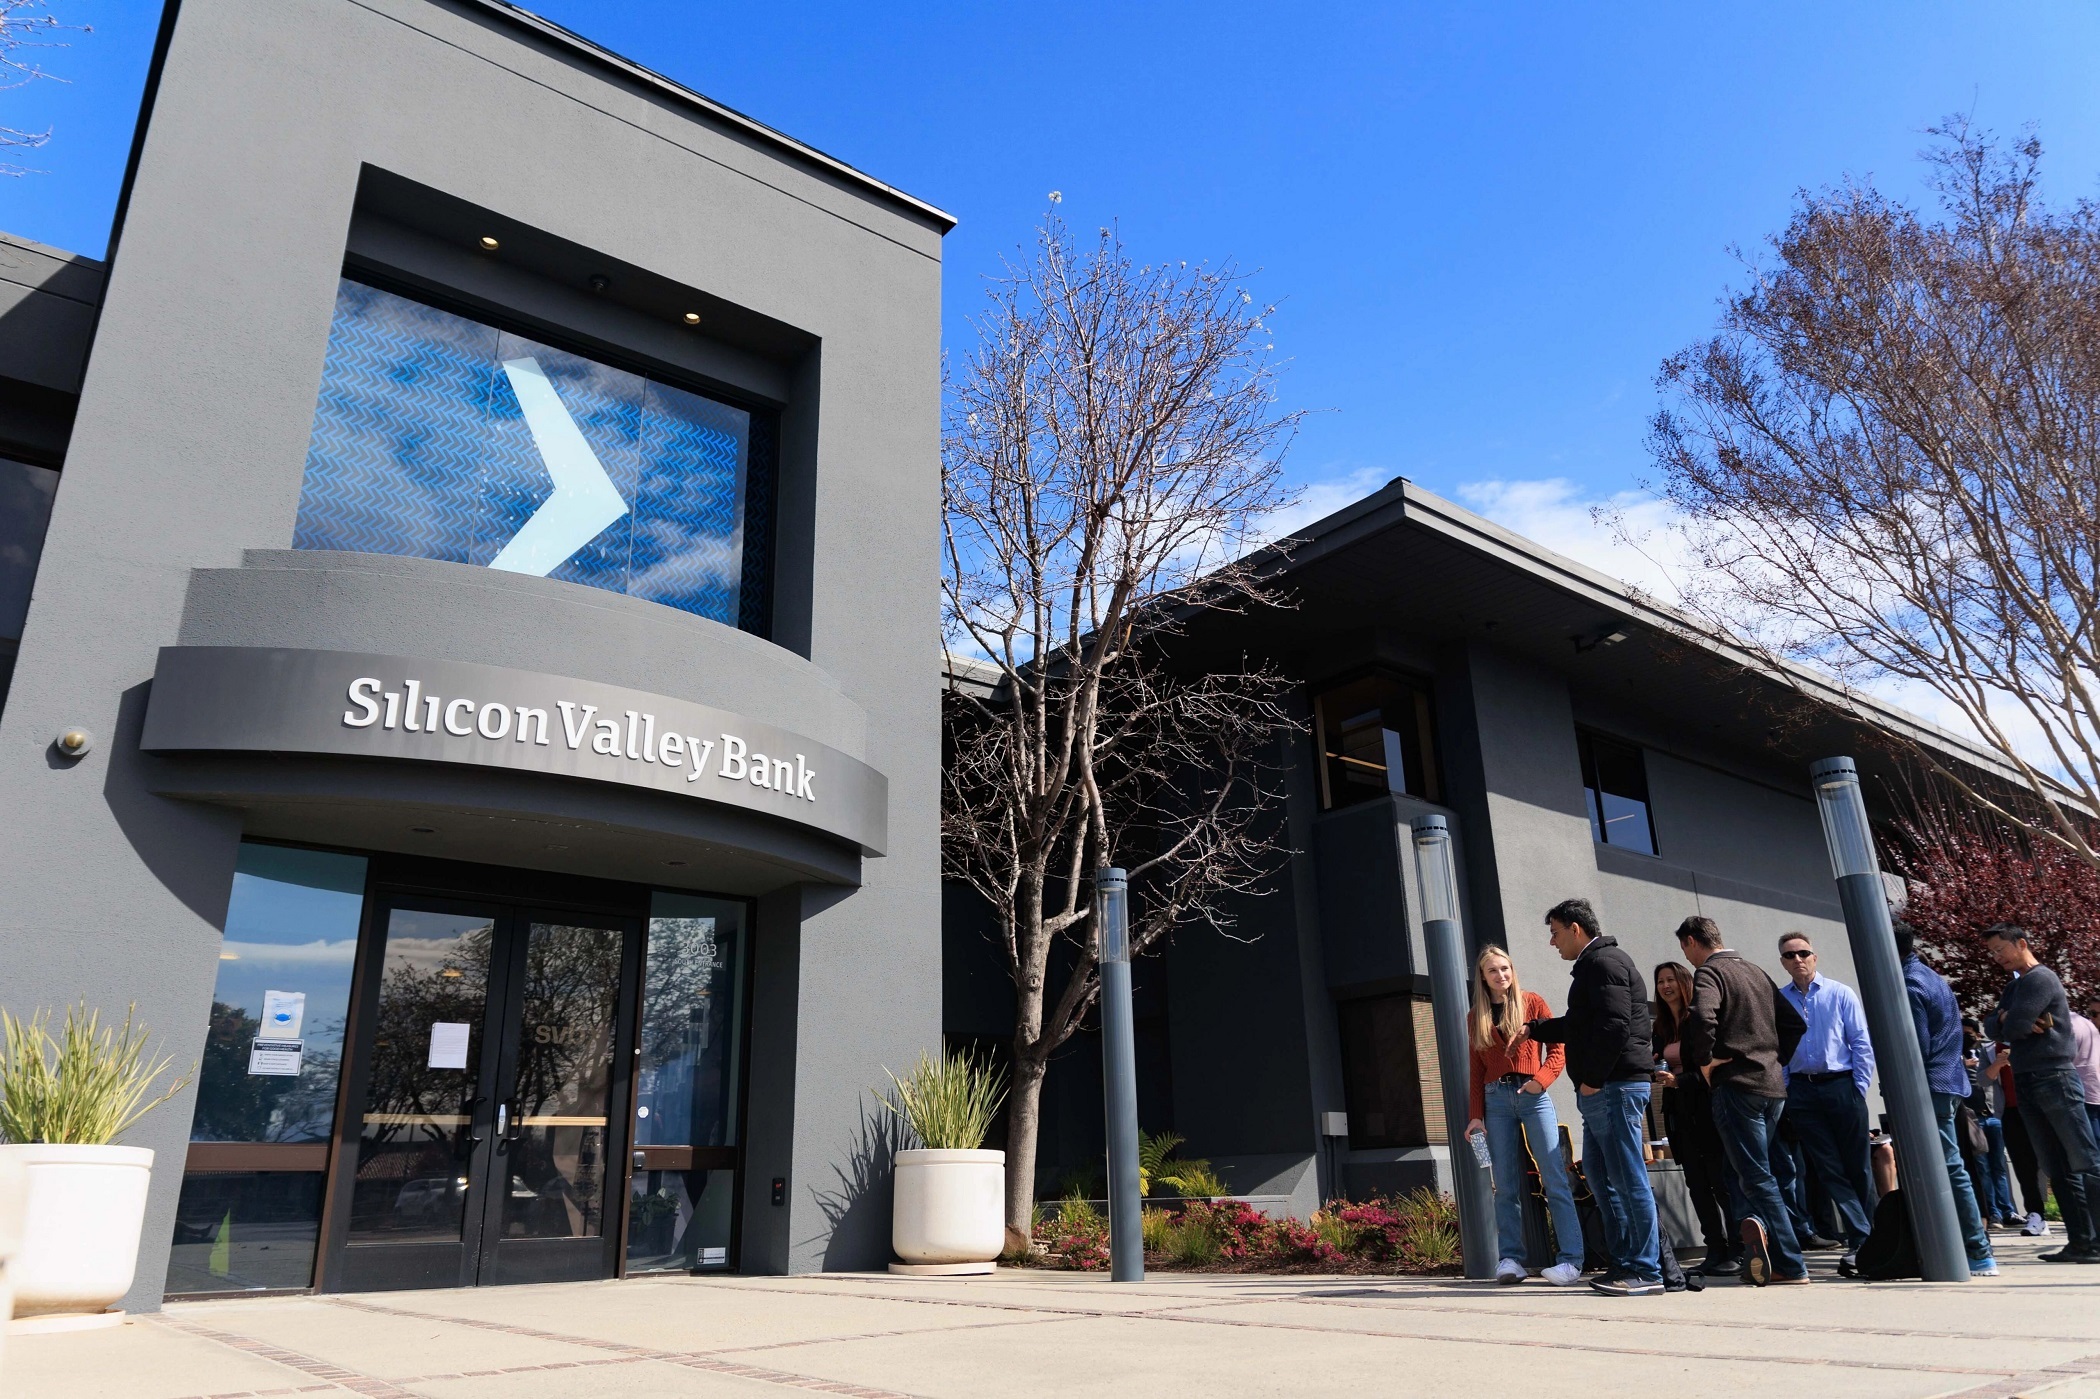 Customers line up to withdraw deposits from Silicon Valley Bank, which failed in March. (Getty Images)